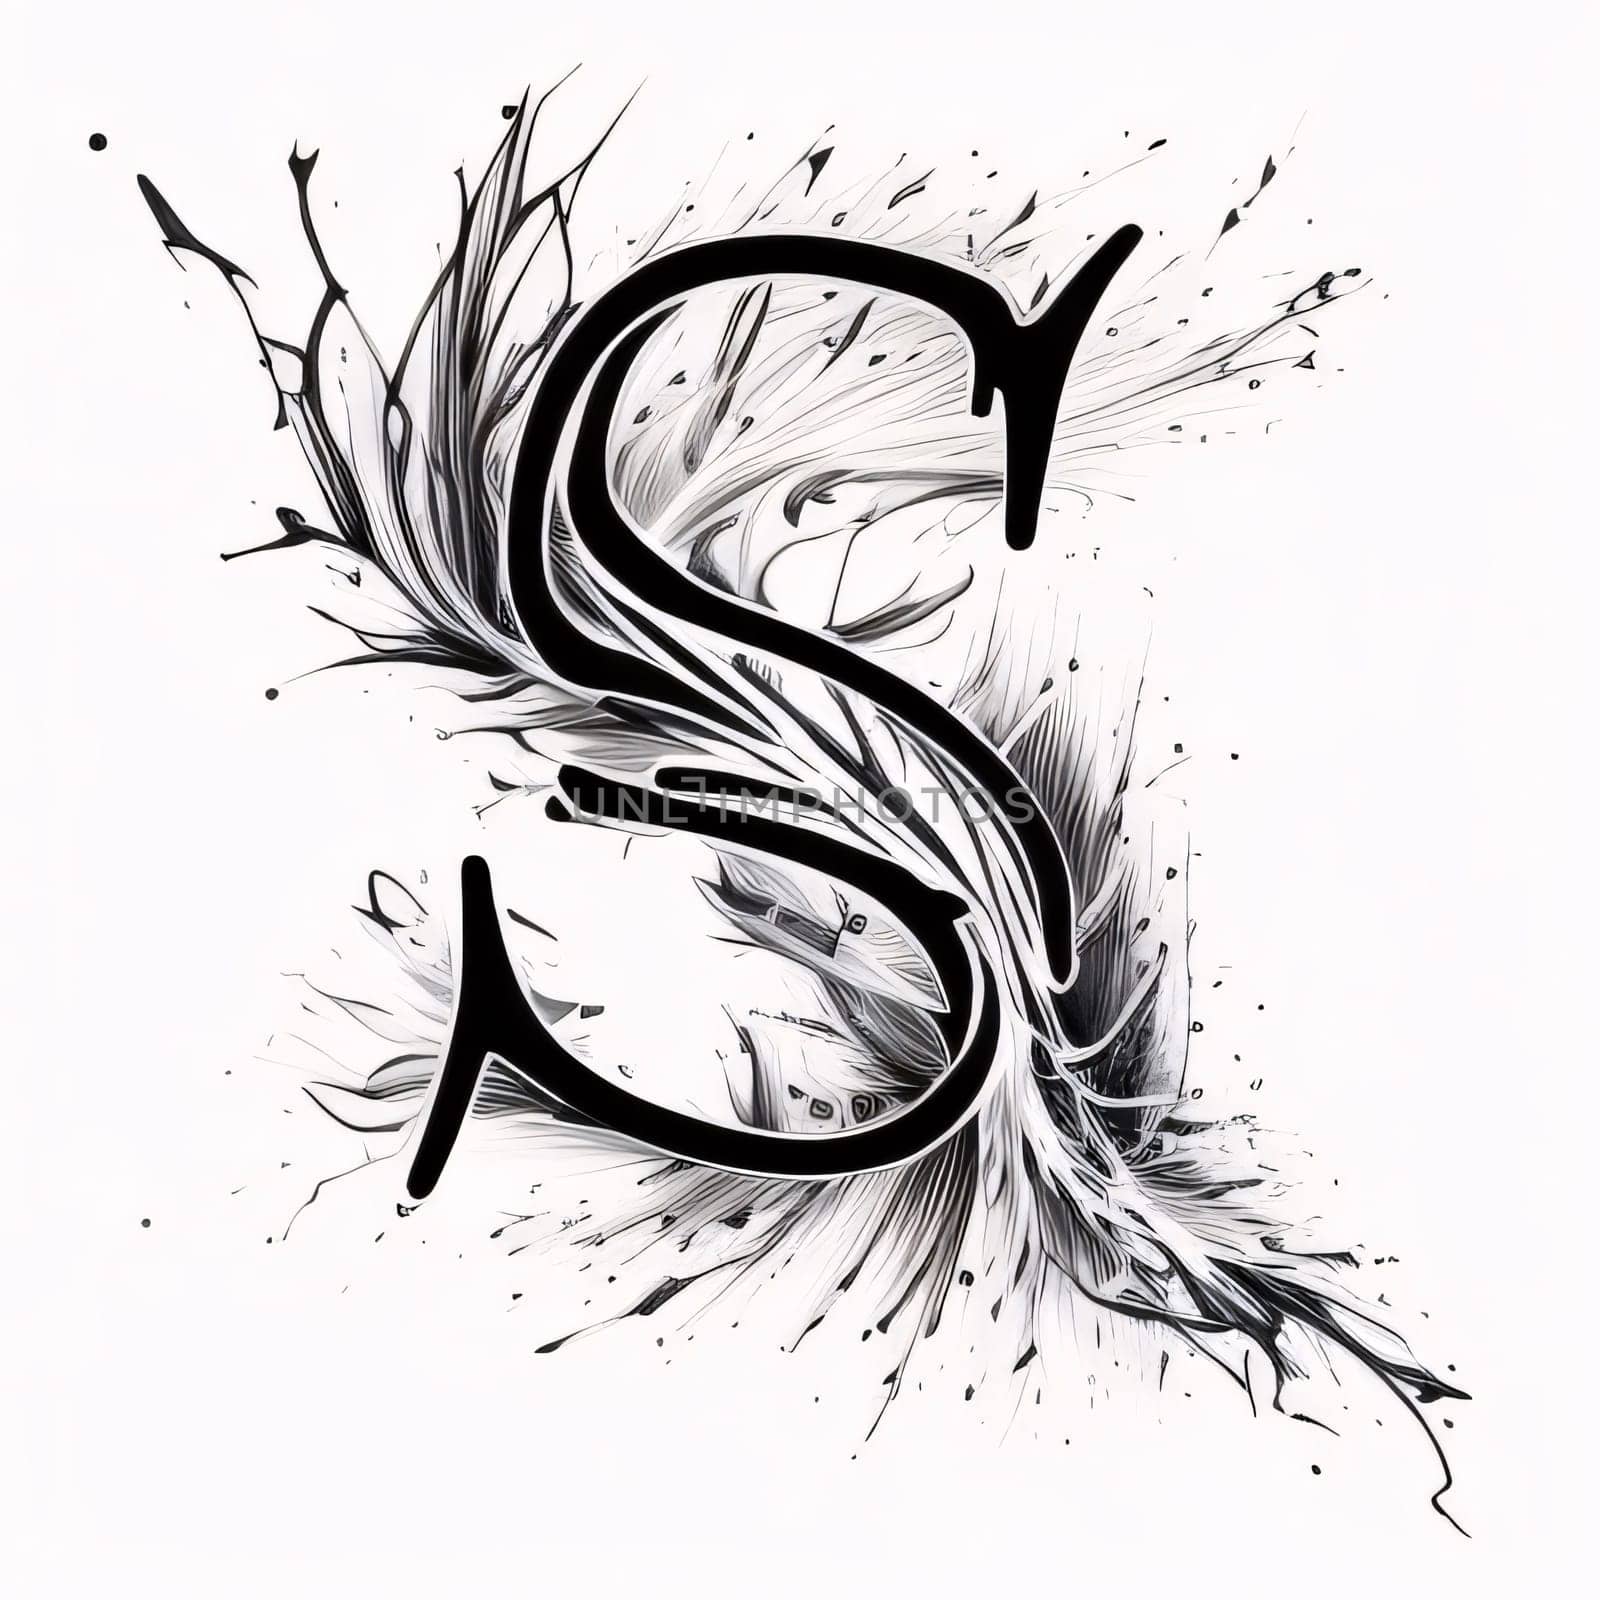 Graphic alphabet letters: Letter S of the alphabet. Hand drawn font with paint splashes.